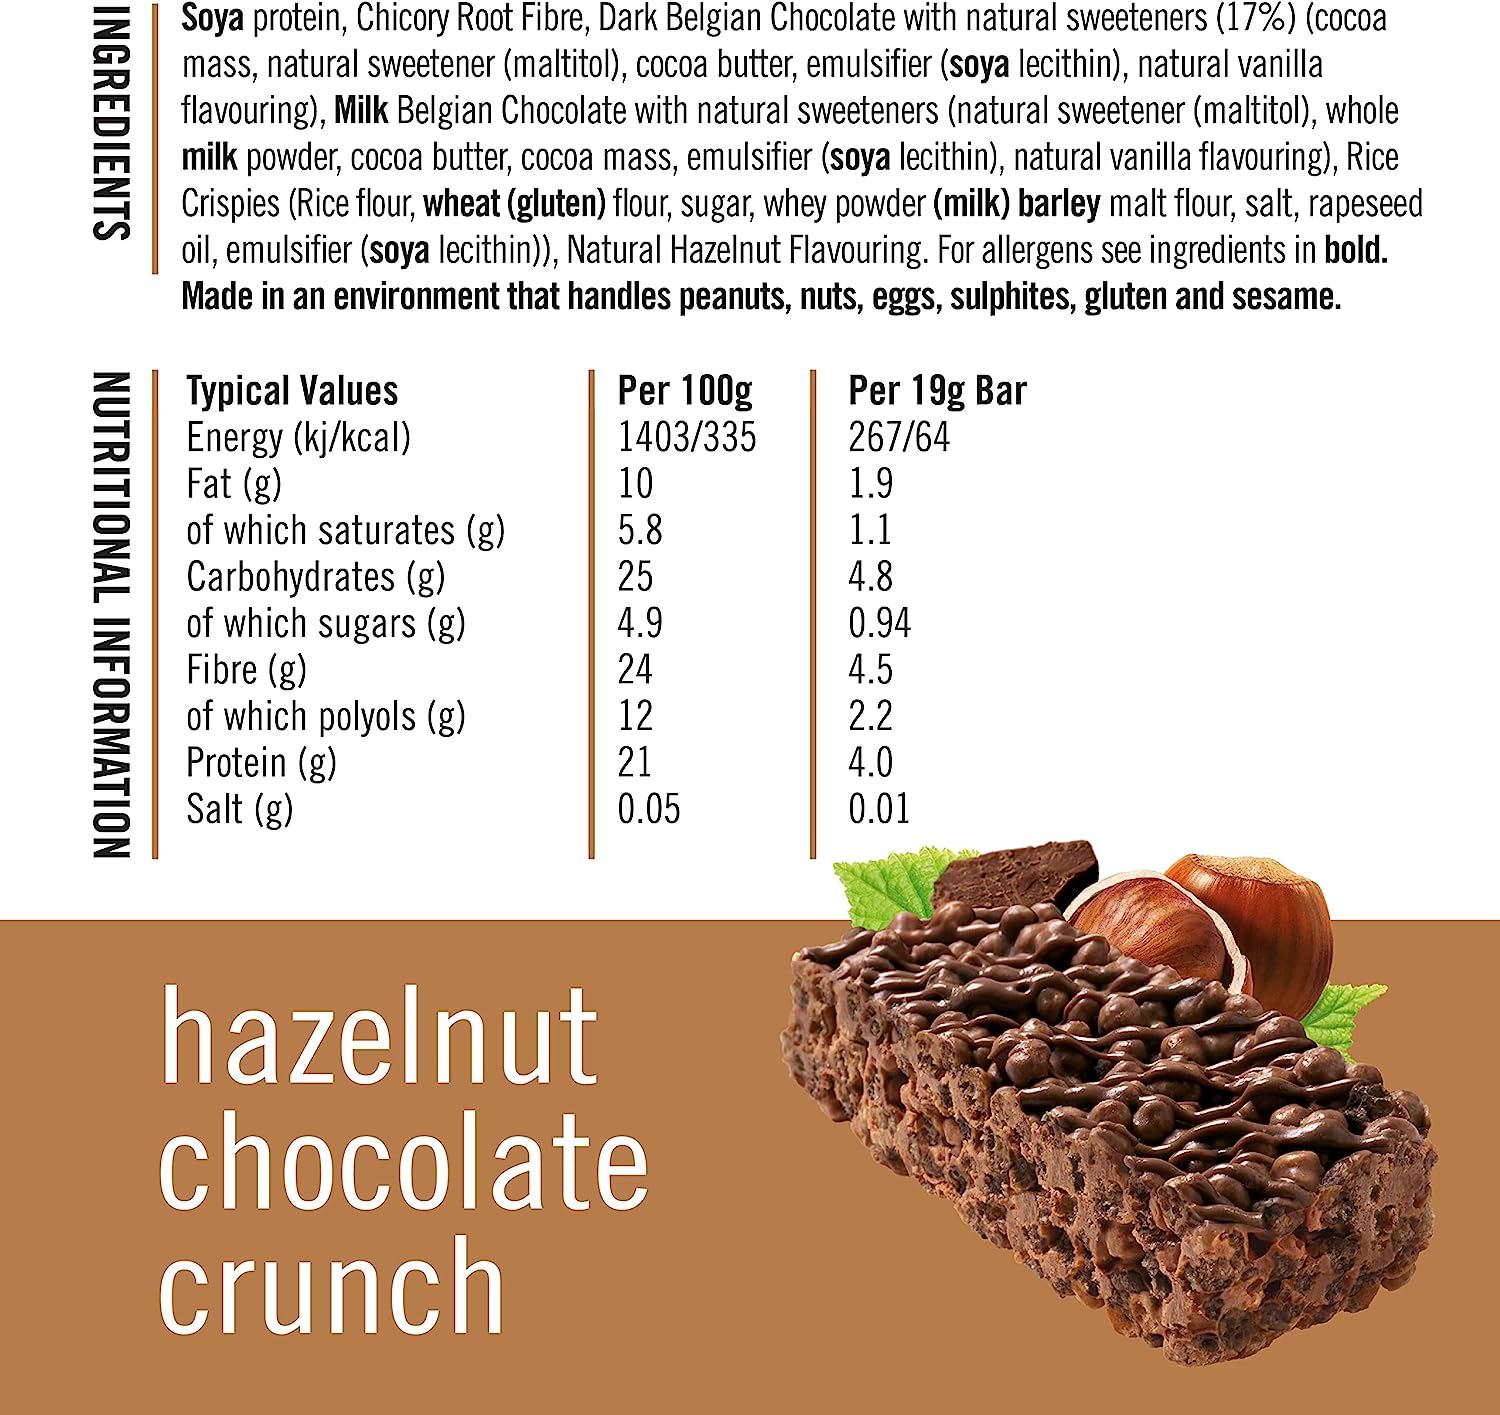 Fitbakes 64 Calories Mini Hazelnut Chocolate Bars 12x19g Review - Nutritional Information